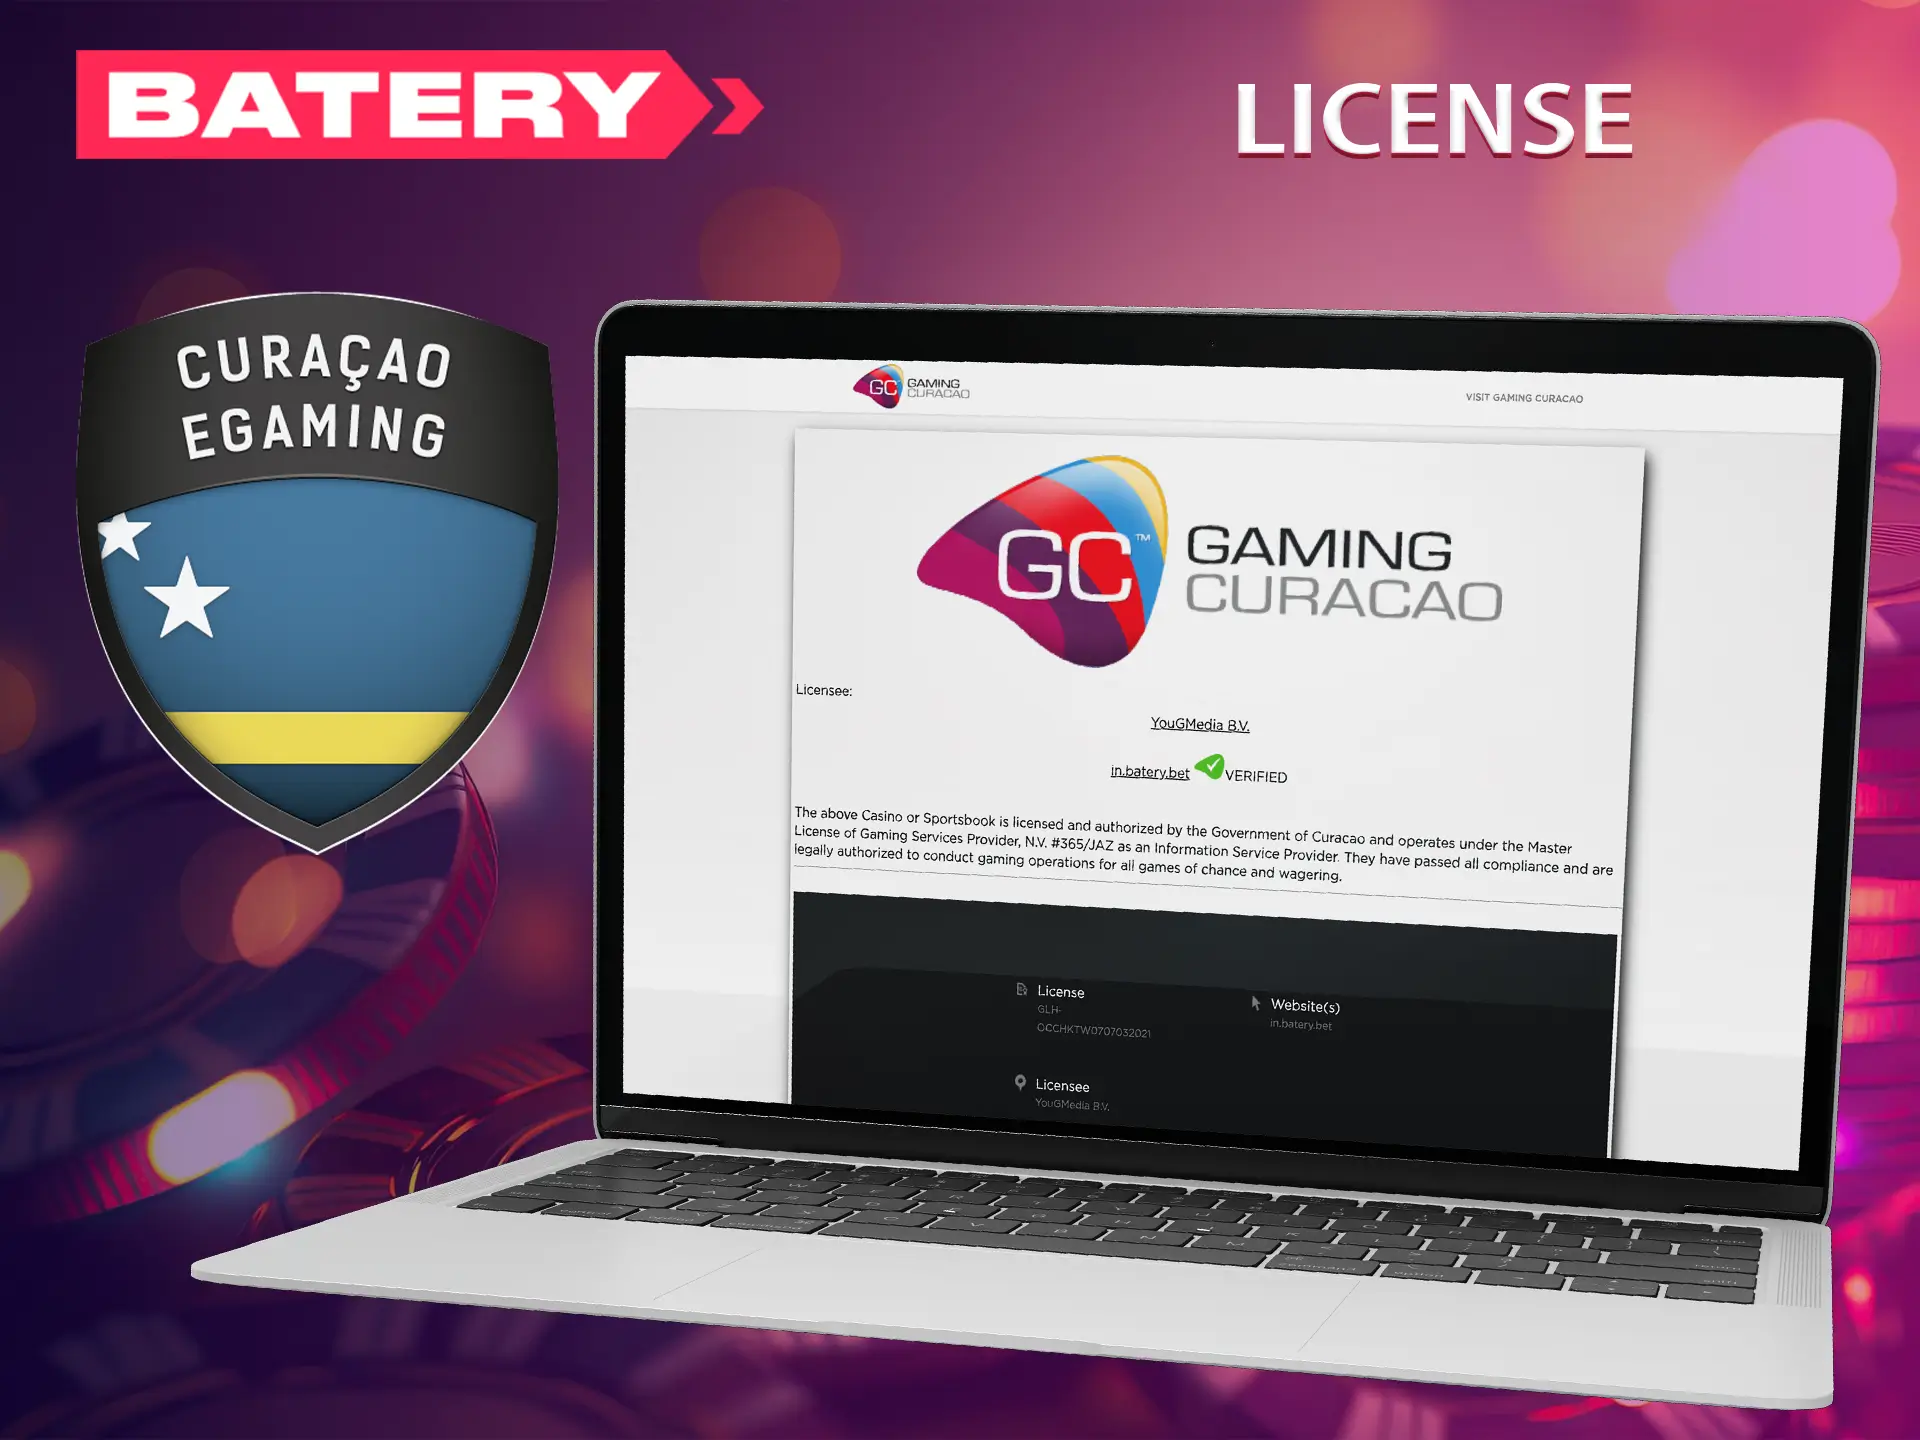 Batery Casino has been operating for a long time and has a famous license that allows you to engage in gambling activities.